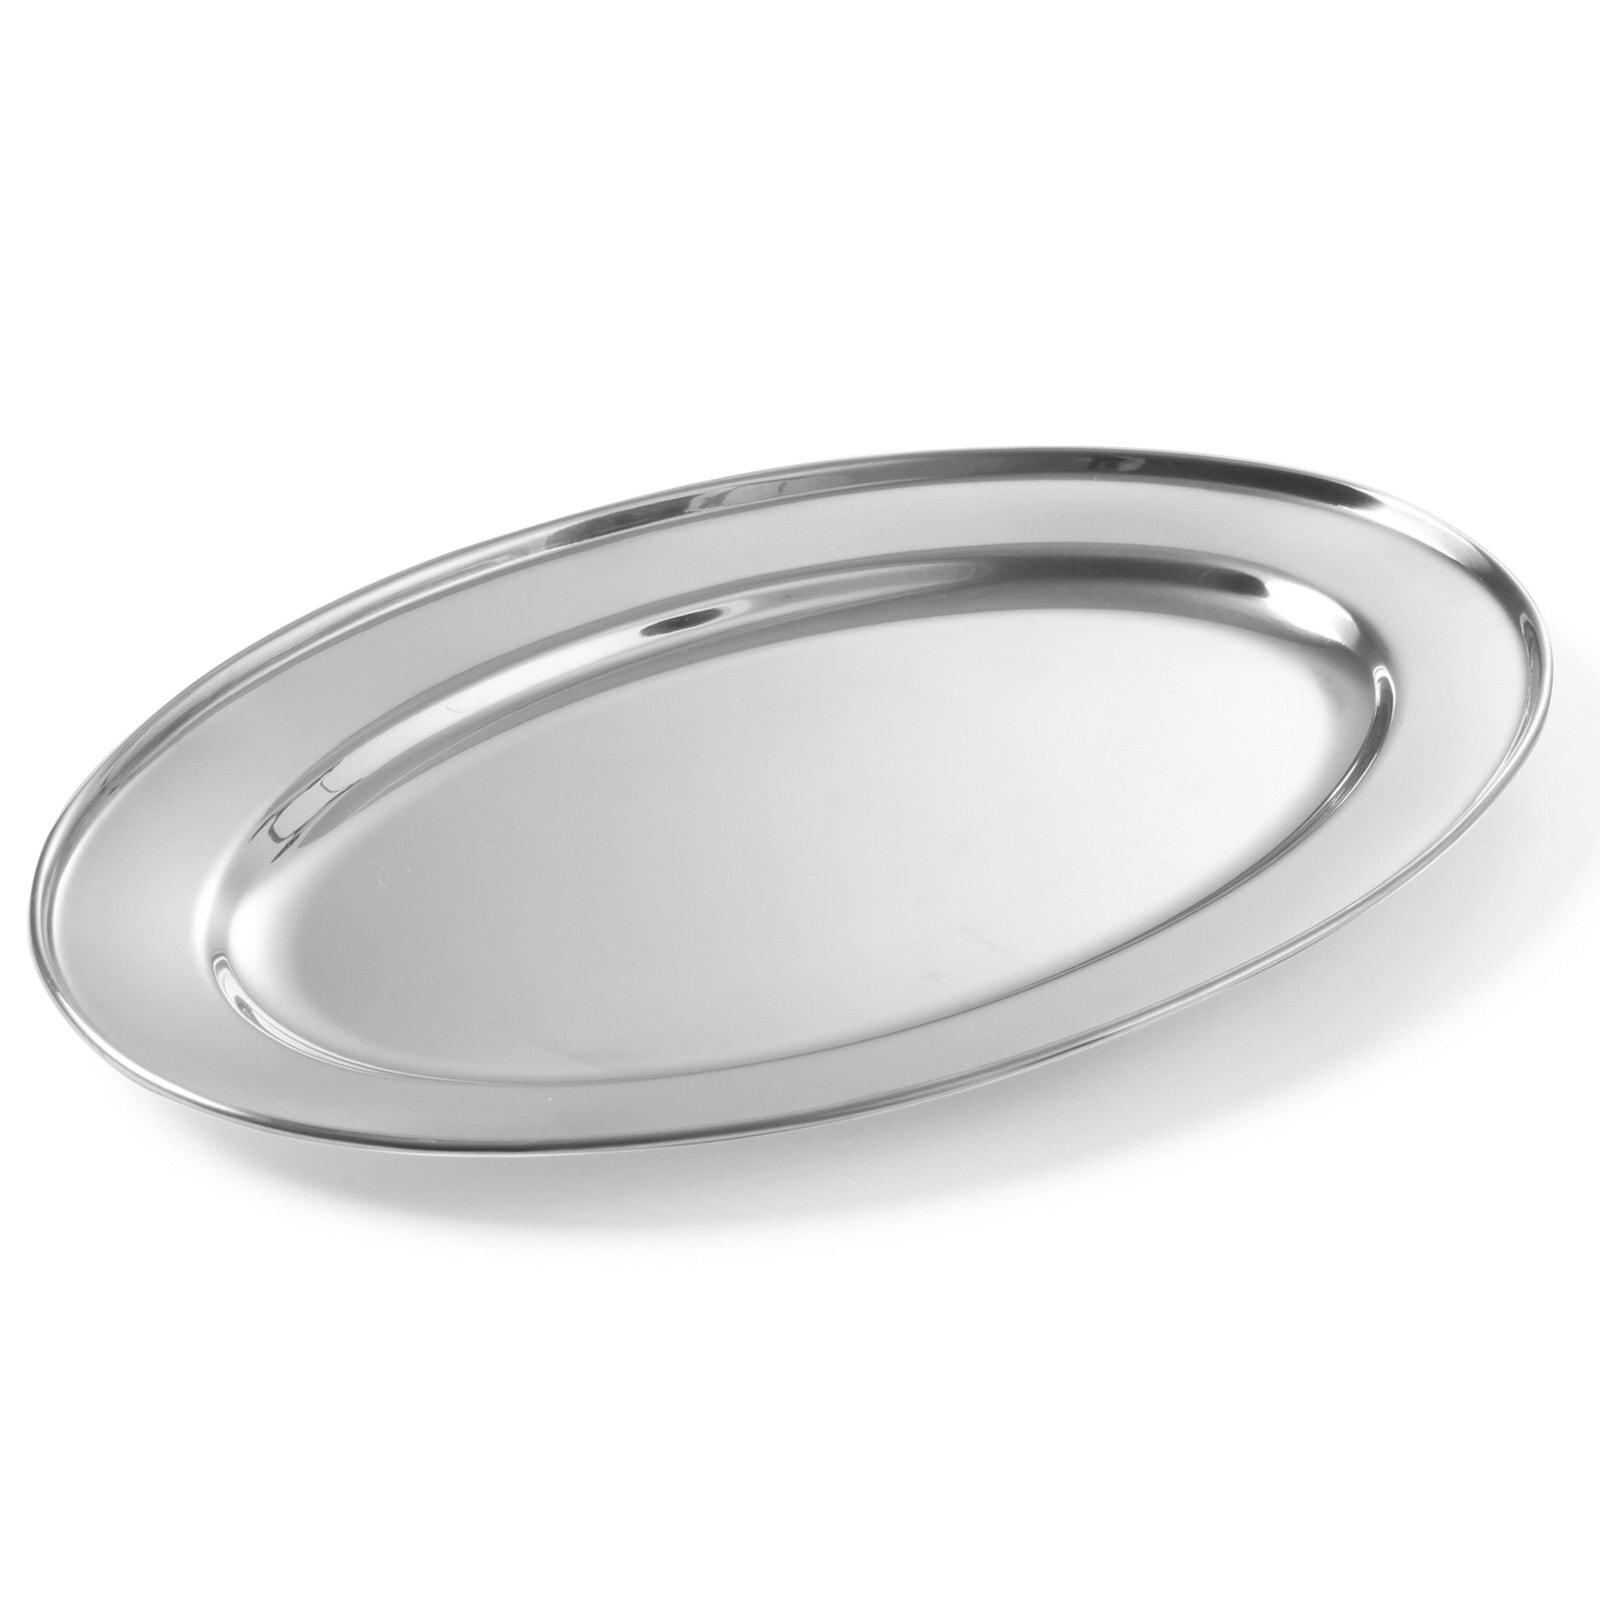 Steel oval meat and sausage platter, length 40 cm - Hendi 404409